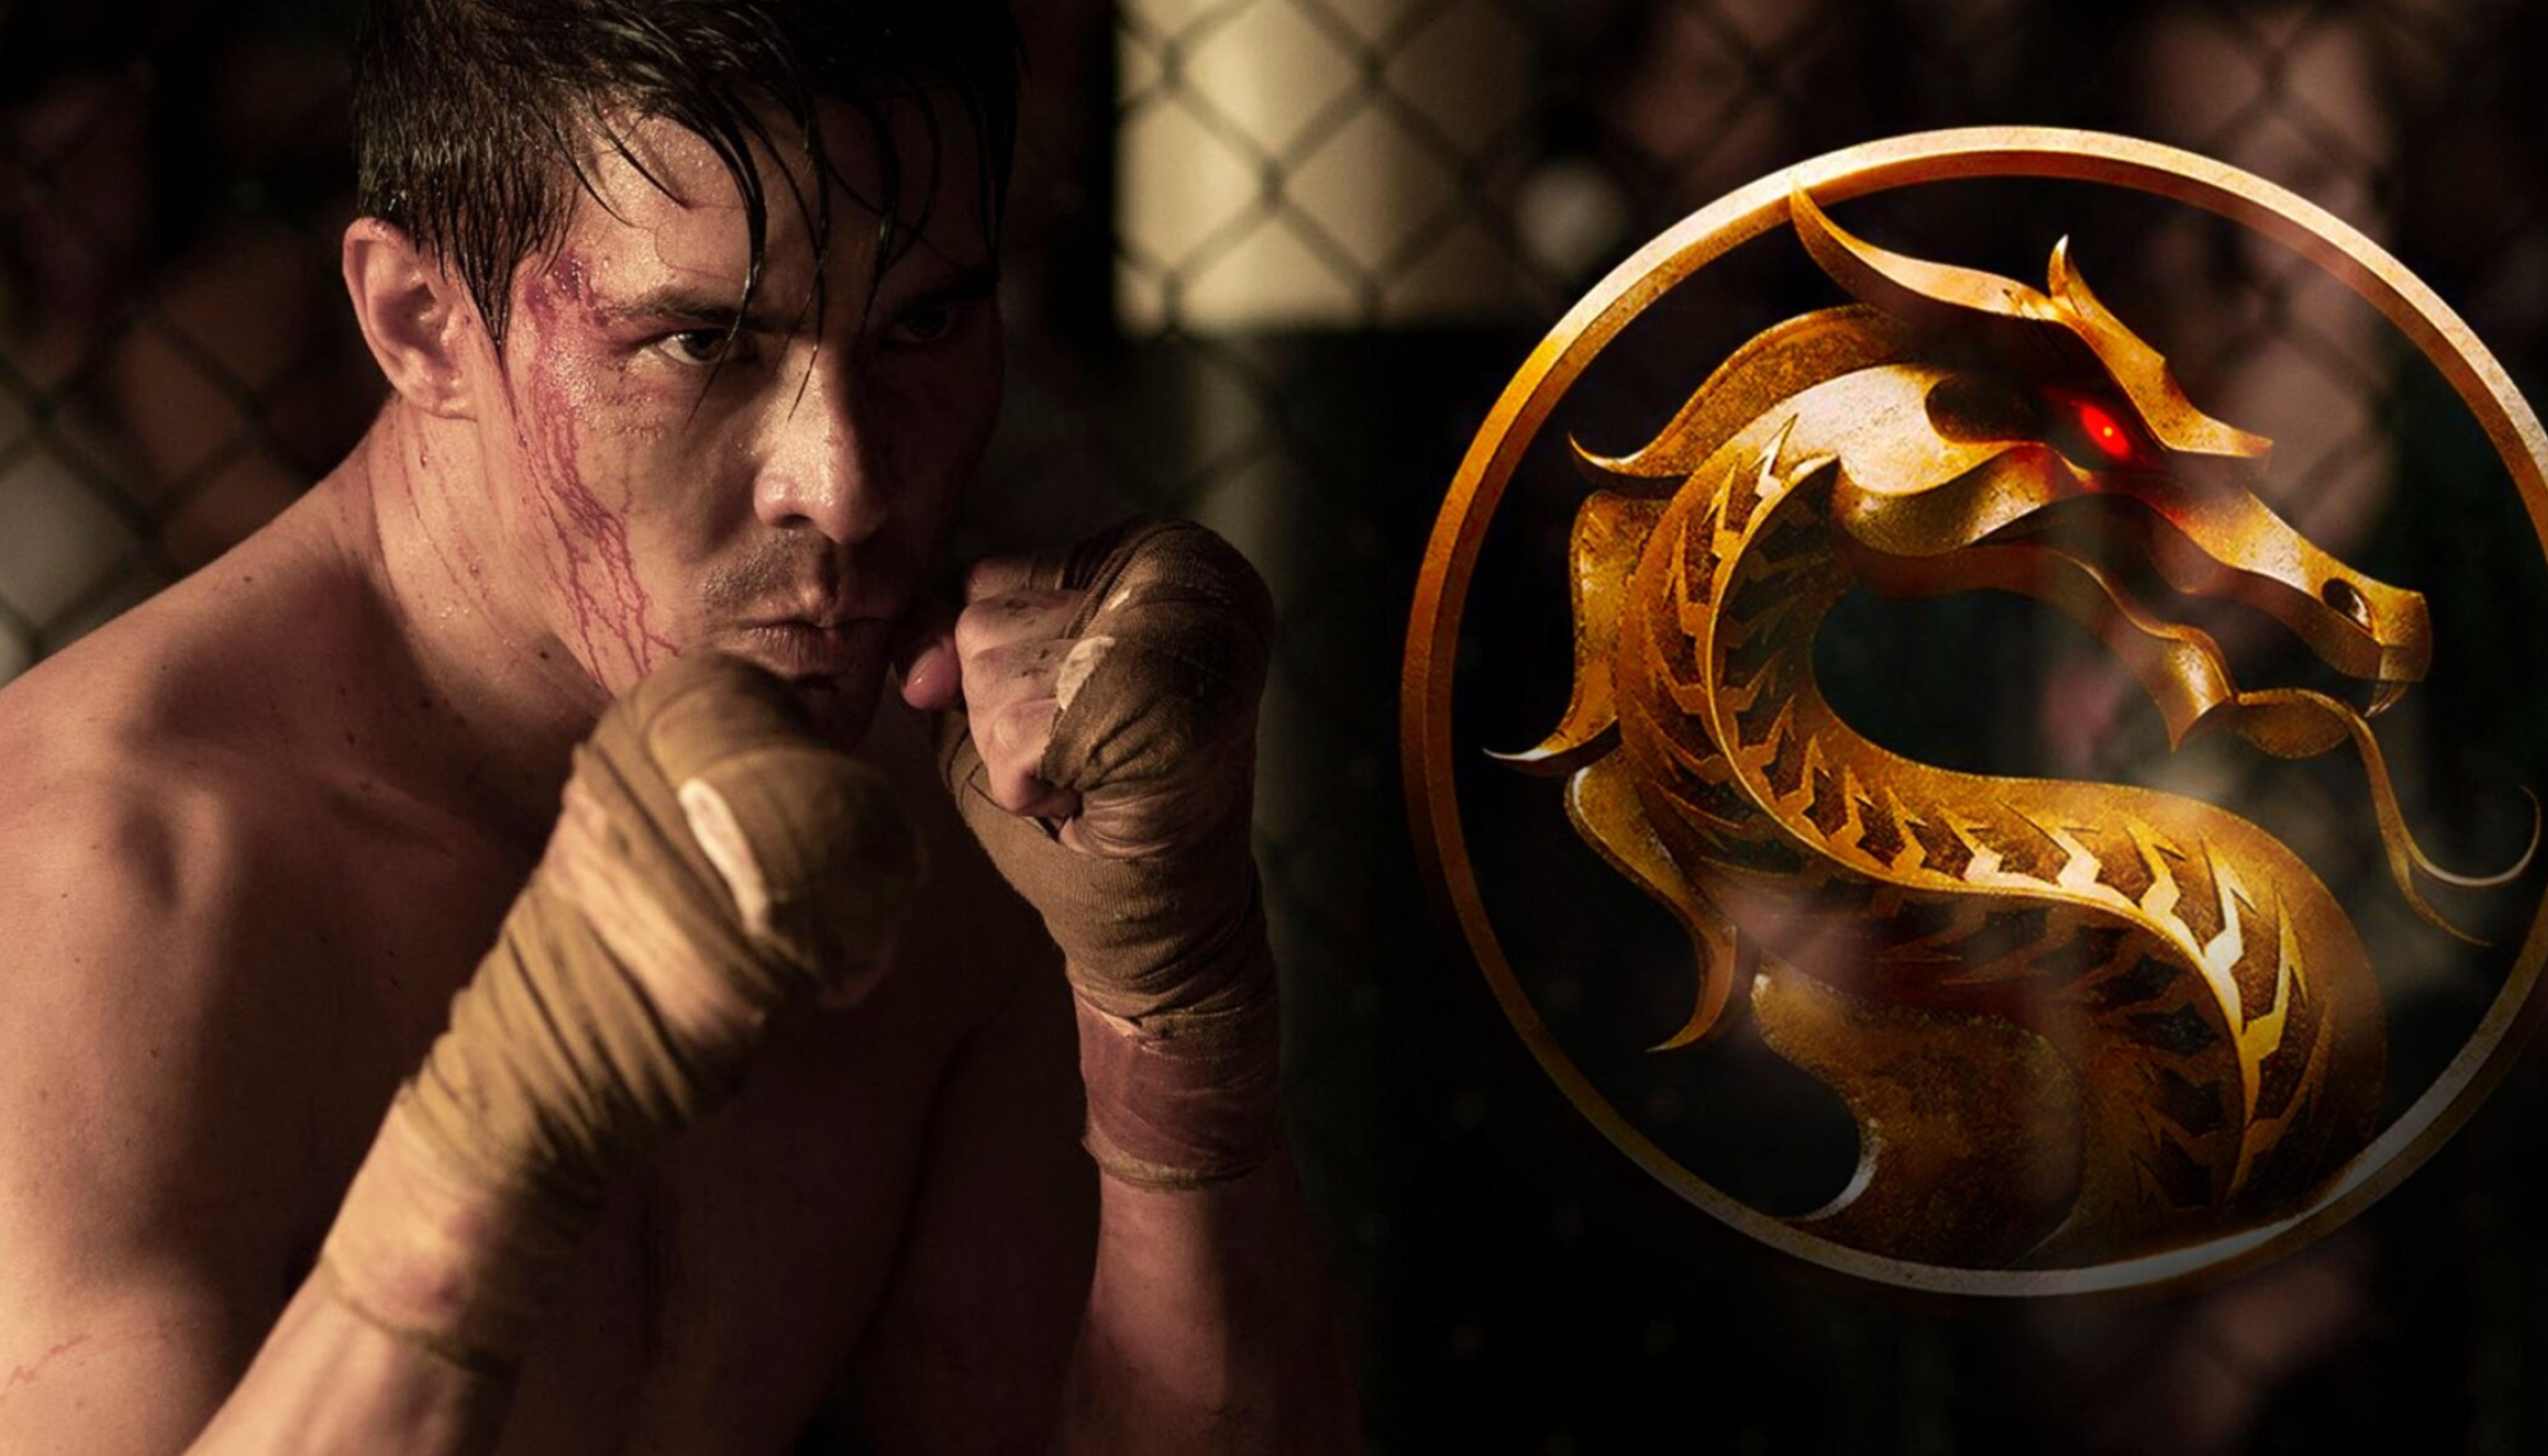 Cole Young movies, Mortal Kombat plot synopsis, Introduction of Lewis Tan's character, 2560x1470 HD Desktop